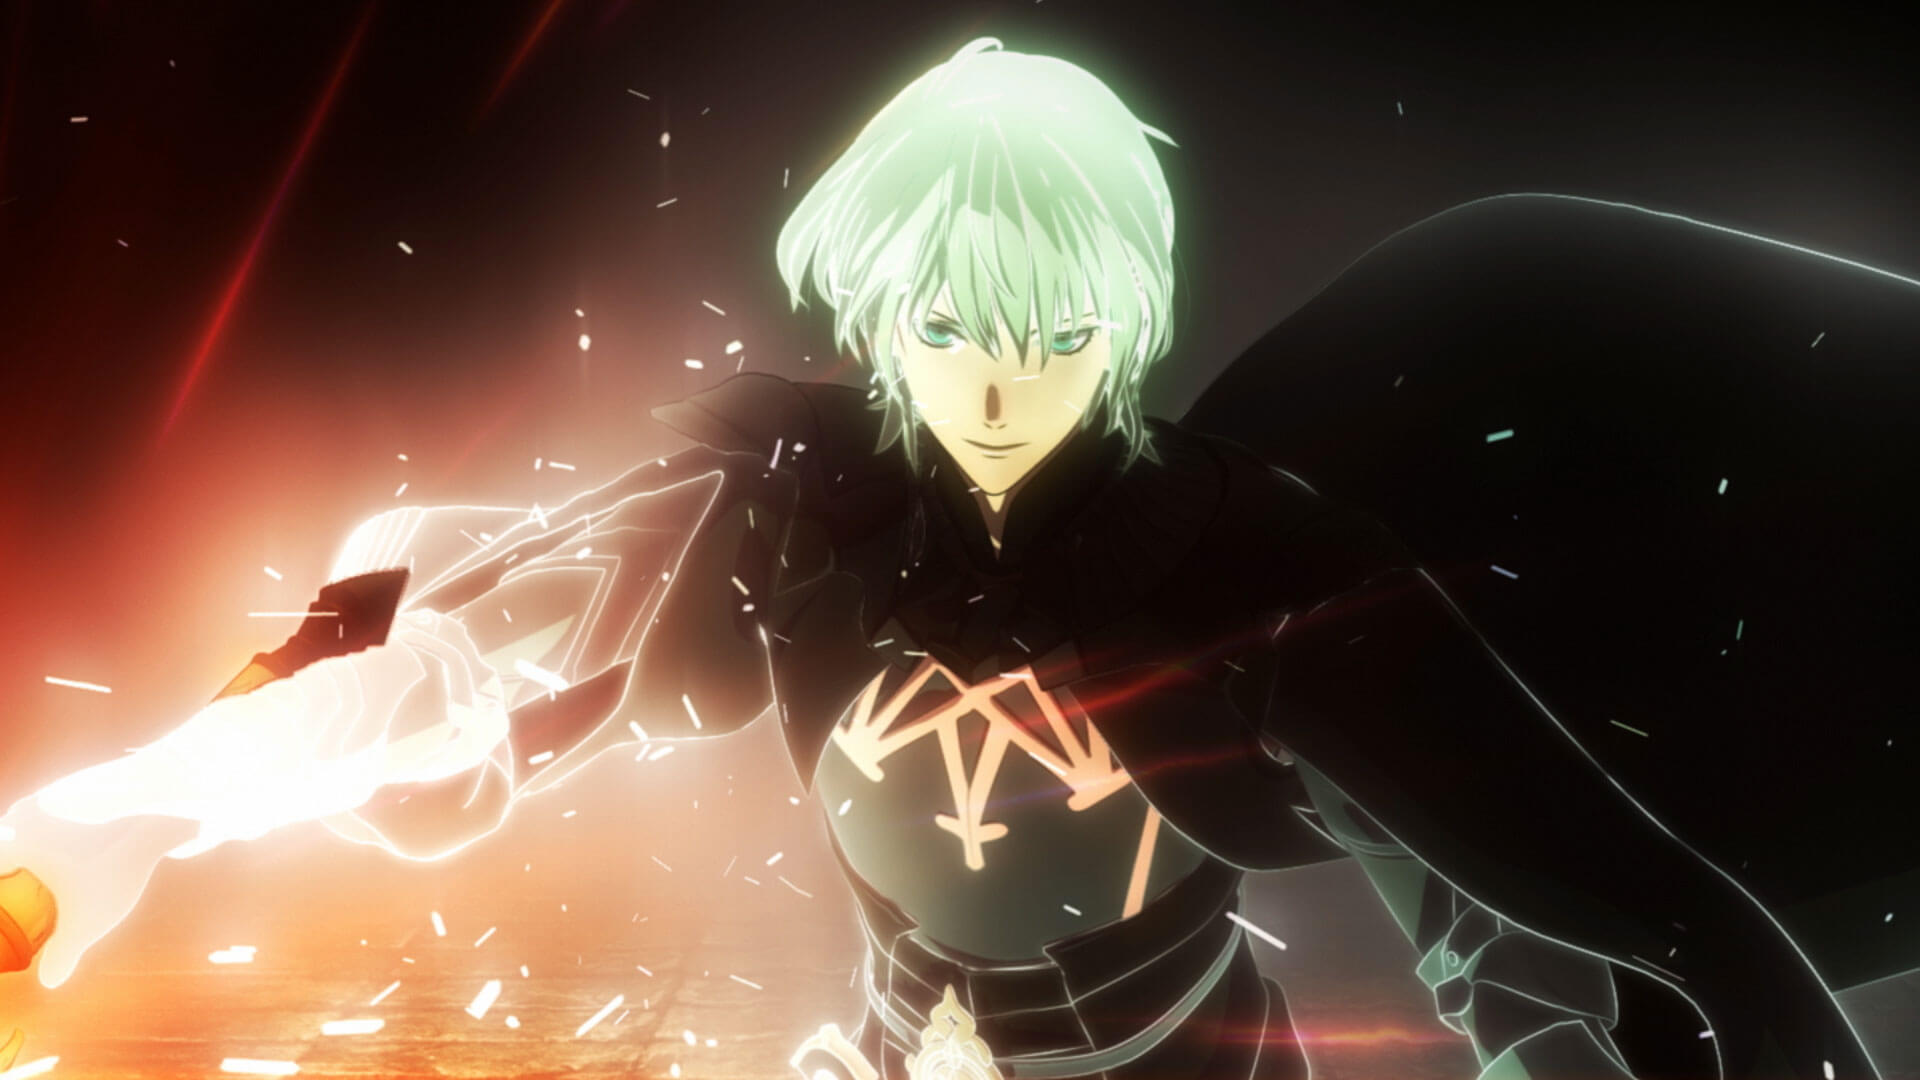 Fire Emblem: Three Houses Takes Top Spot in the UK Charts